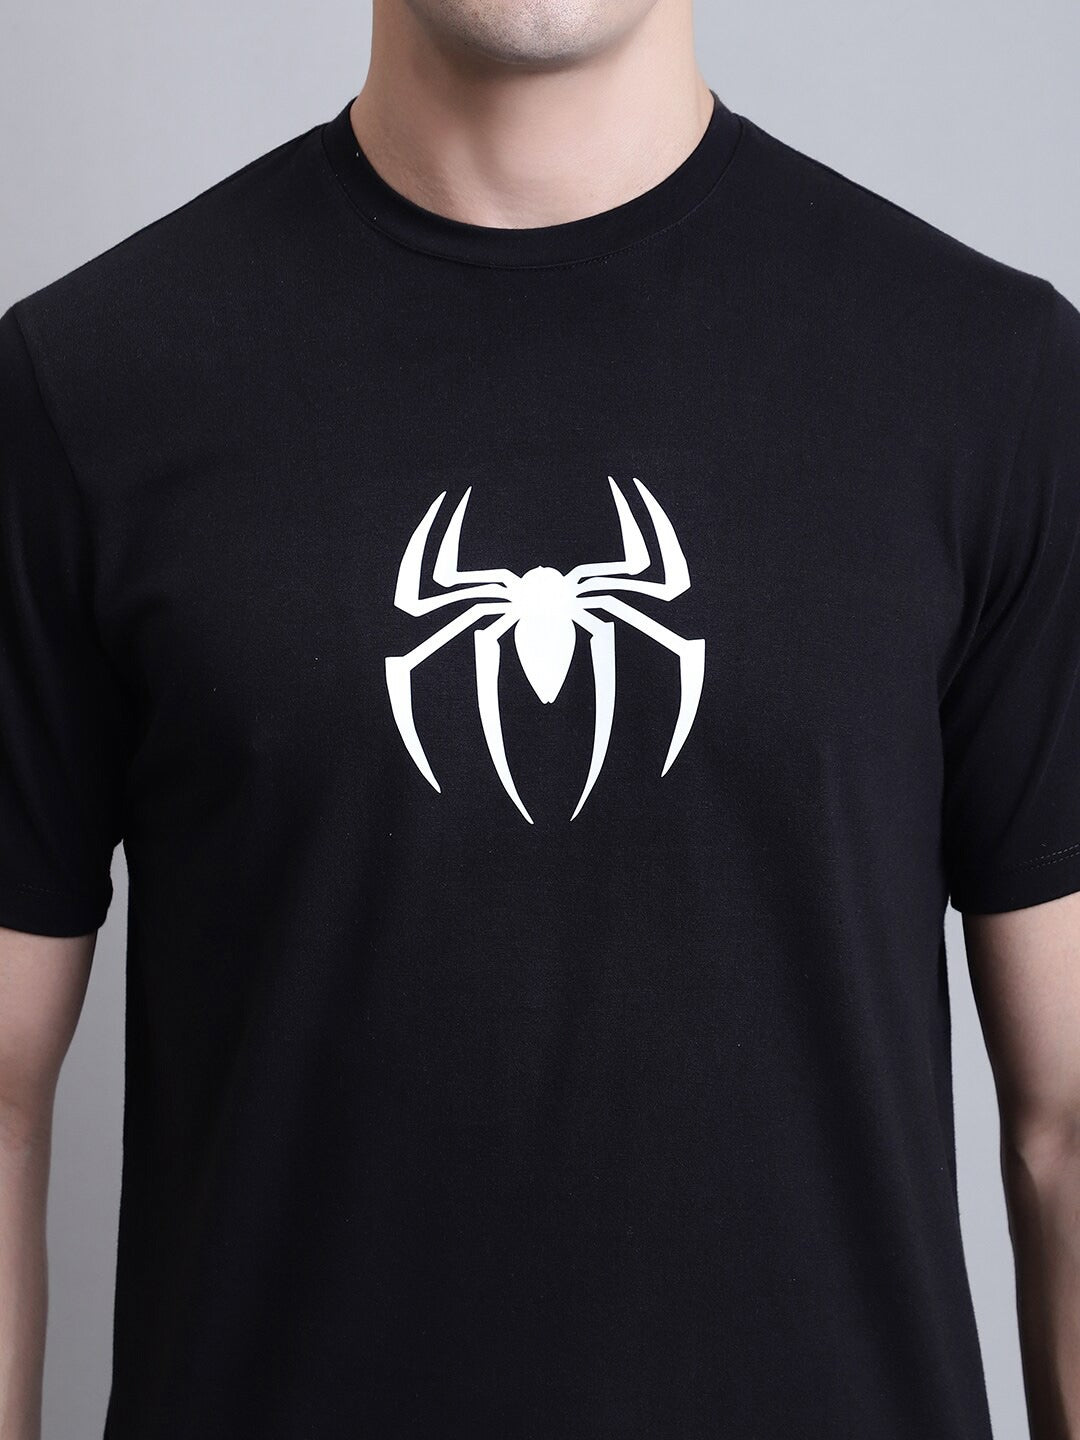 Men's The Spider Print Graphic Slim Fit Tee